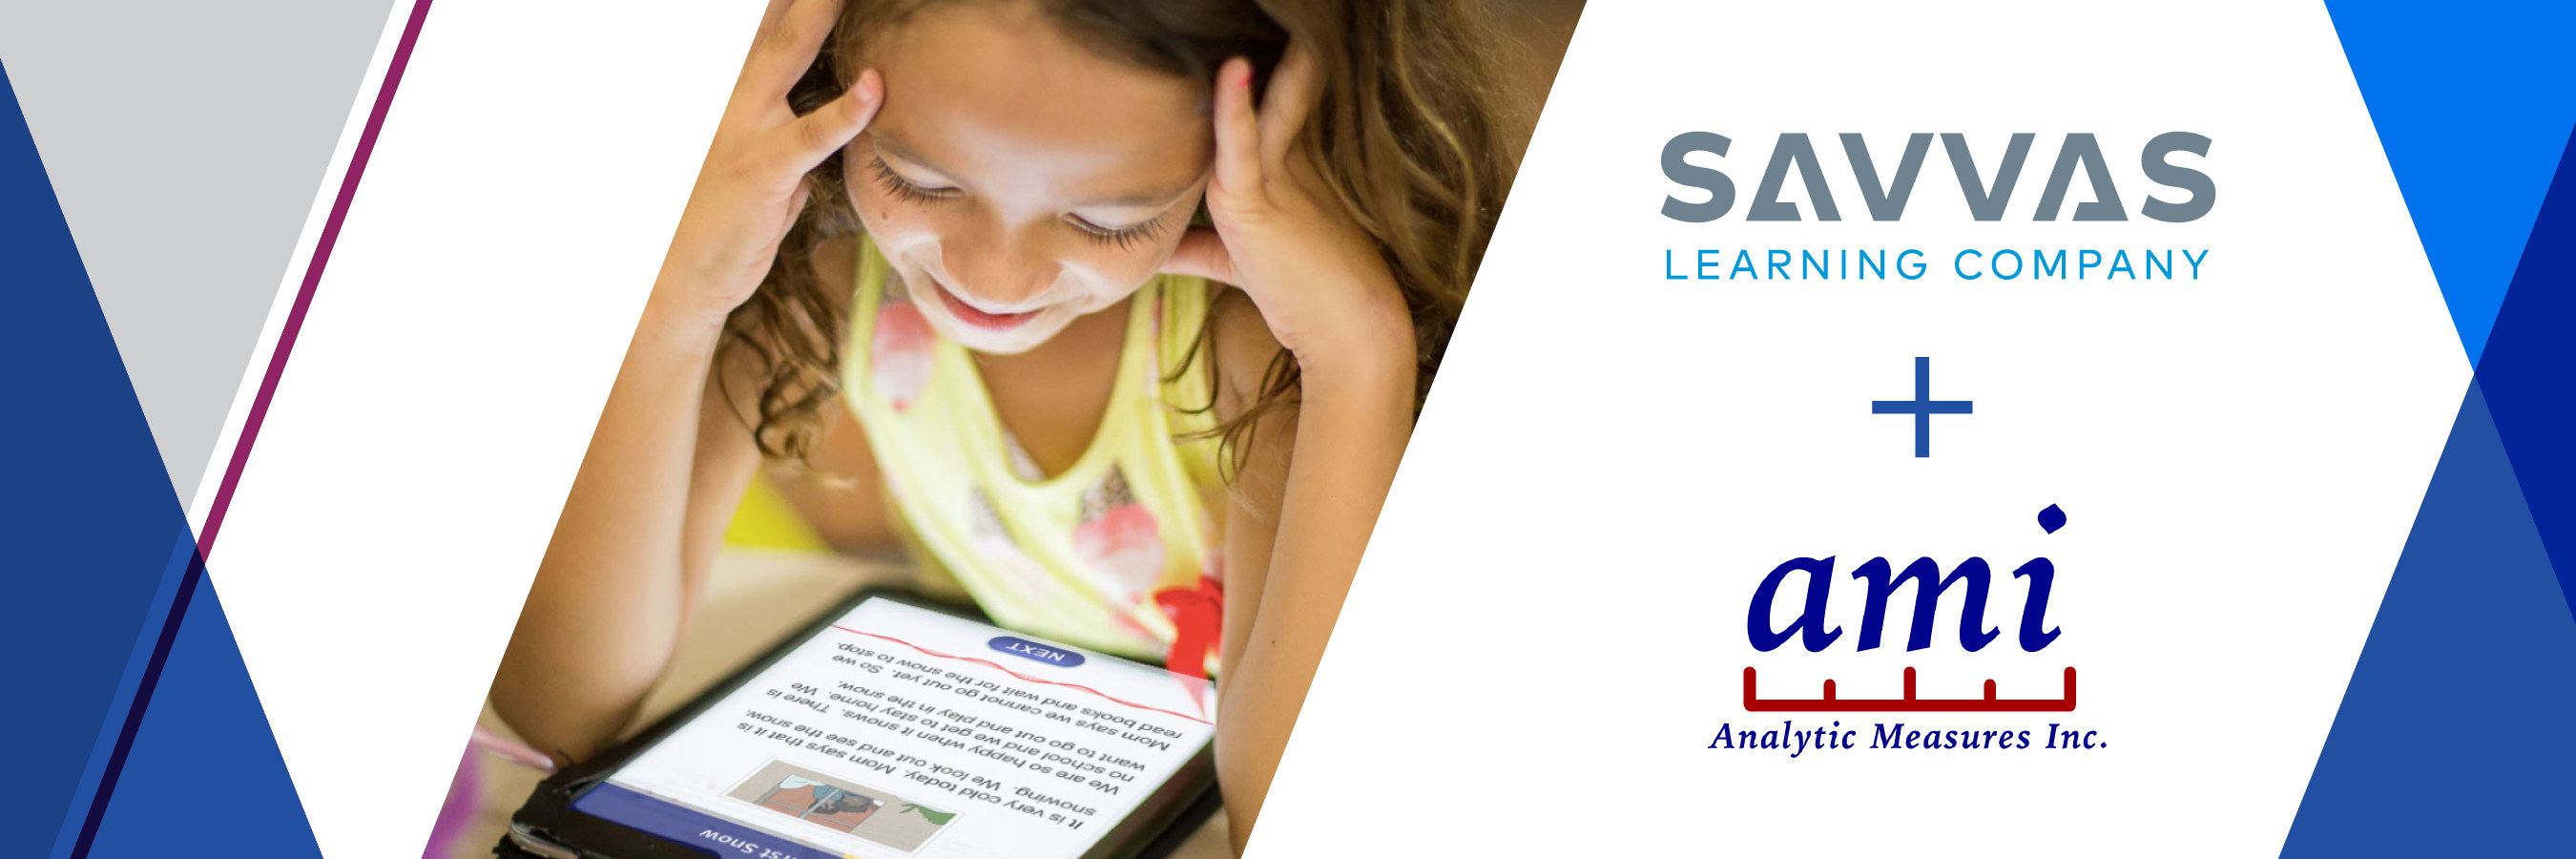 Savvas Learning Company Partners With Analytic Measures Inc To Provide Oral Reading Fluency Tool With Its K 5 Literacy Programs